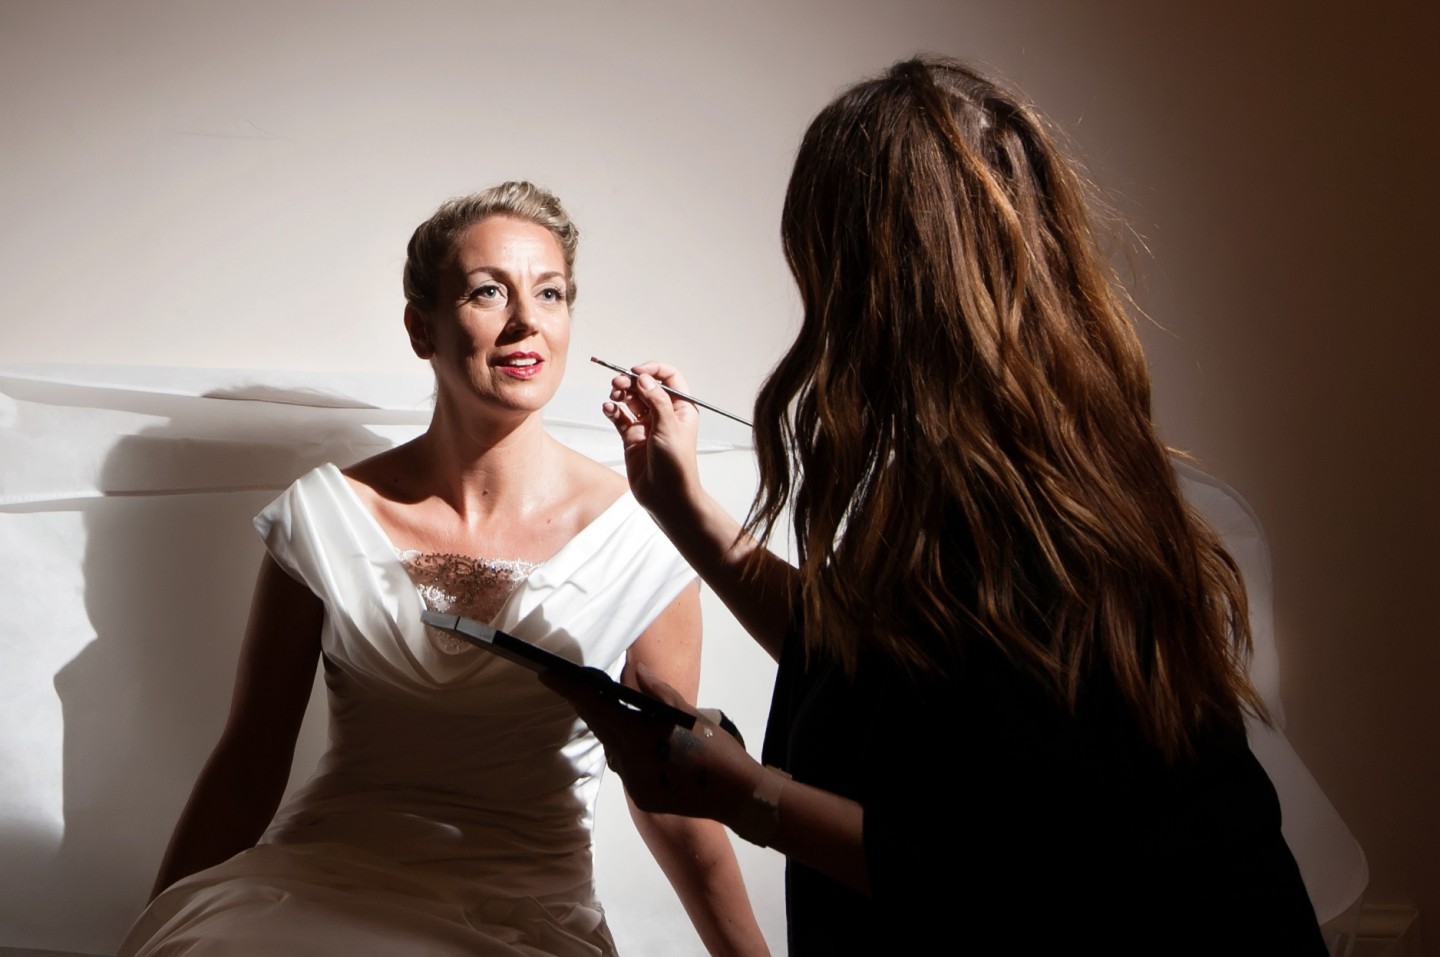 Bridy the beautiful Bride! Make-up by Tina Brocklebank.Photo by GJA photography.